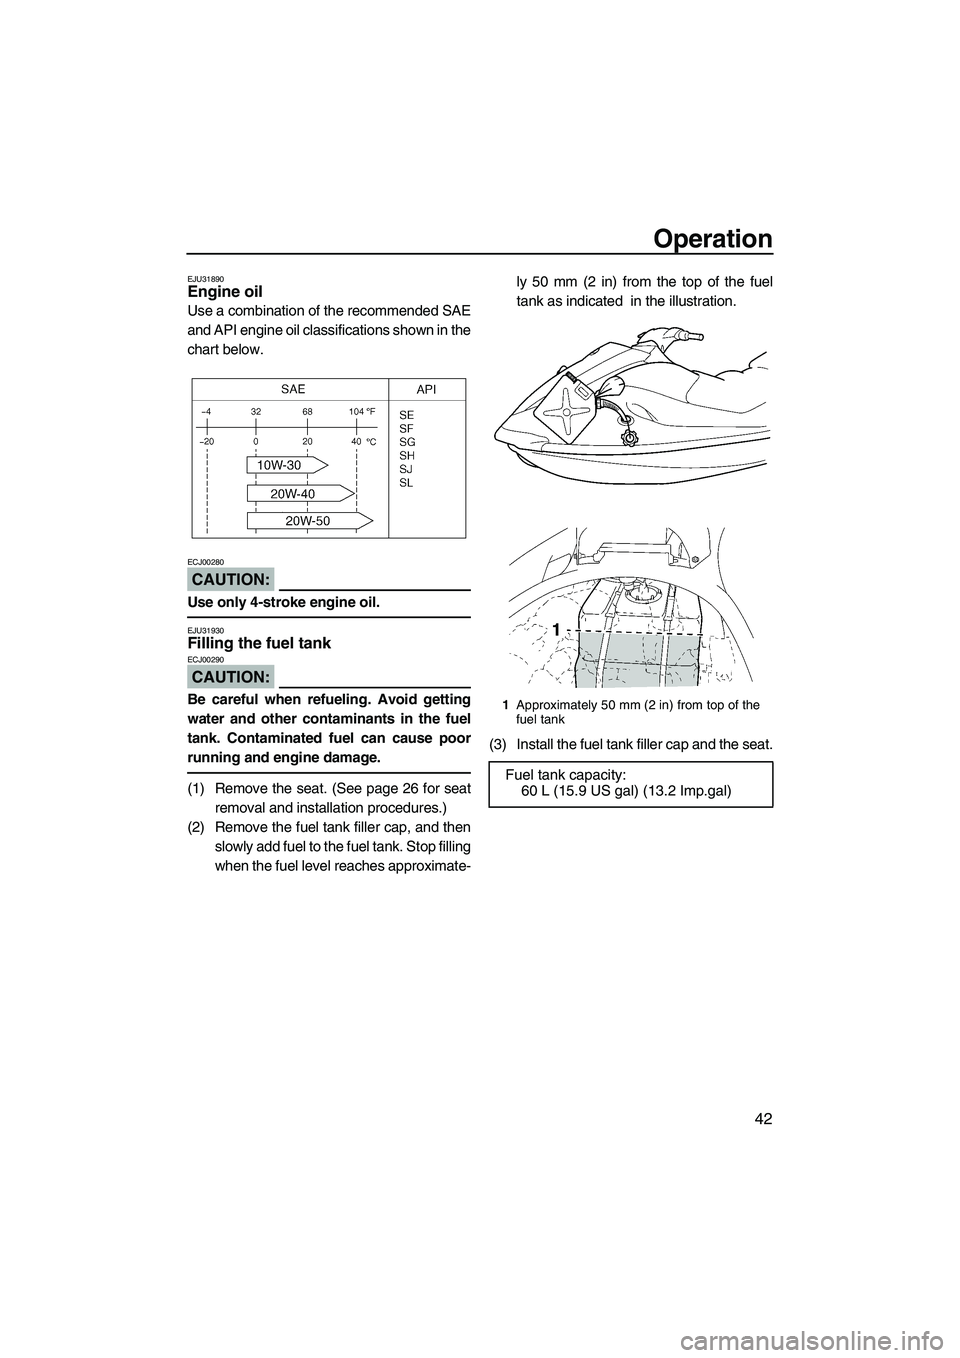 YAMAHA VX CRUISER 2007 Service Manual Operation
42
EJU31890Engine oil 
Use a combination of the recommended SAE
and API engine oil classifications shown in the
chart below.
CAUTION:
ECJ00280
Use only 4-stroke engine oil.
EJU31930Filling t